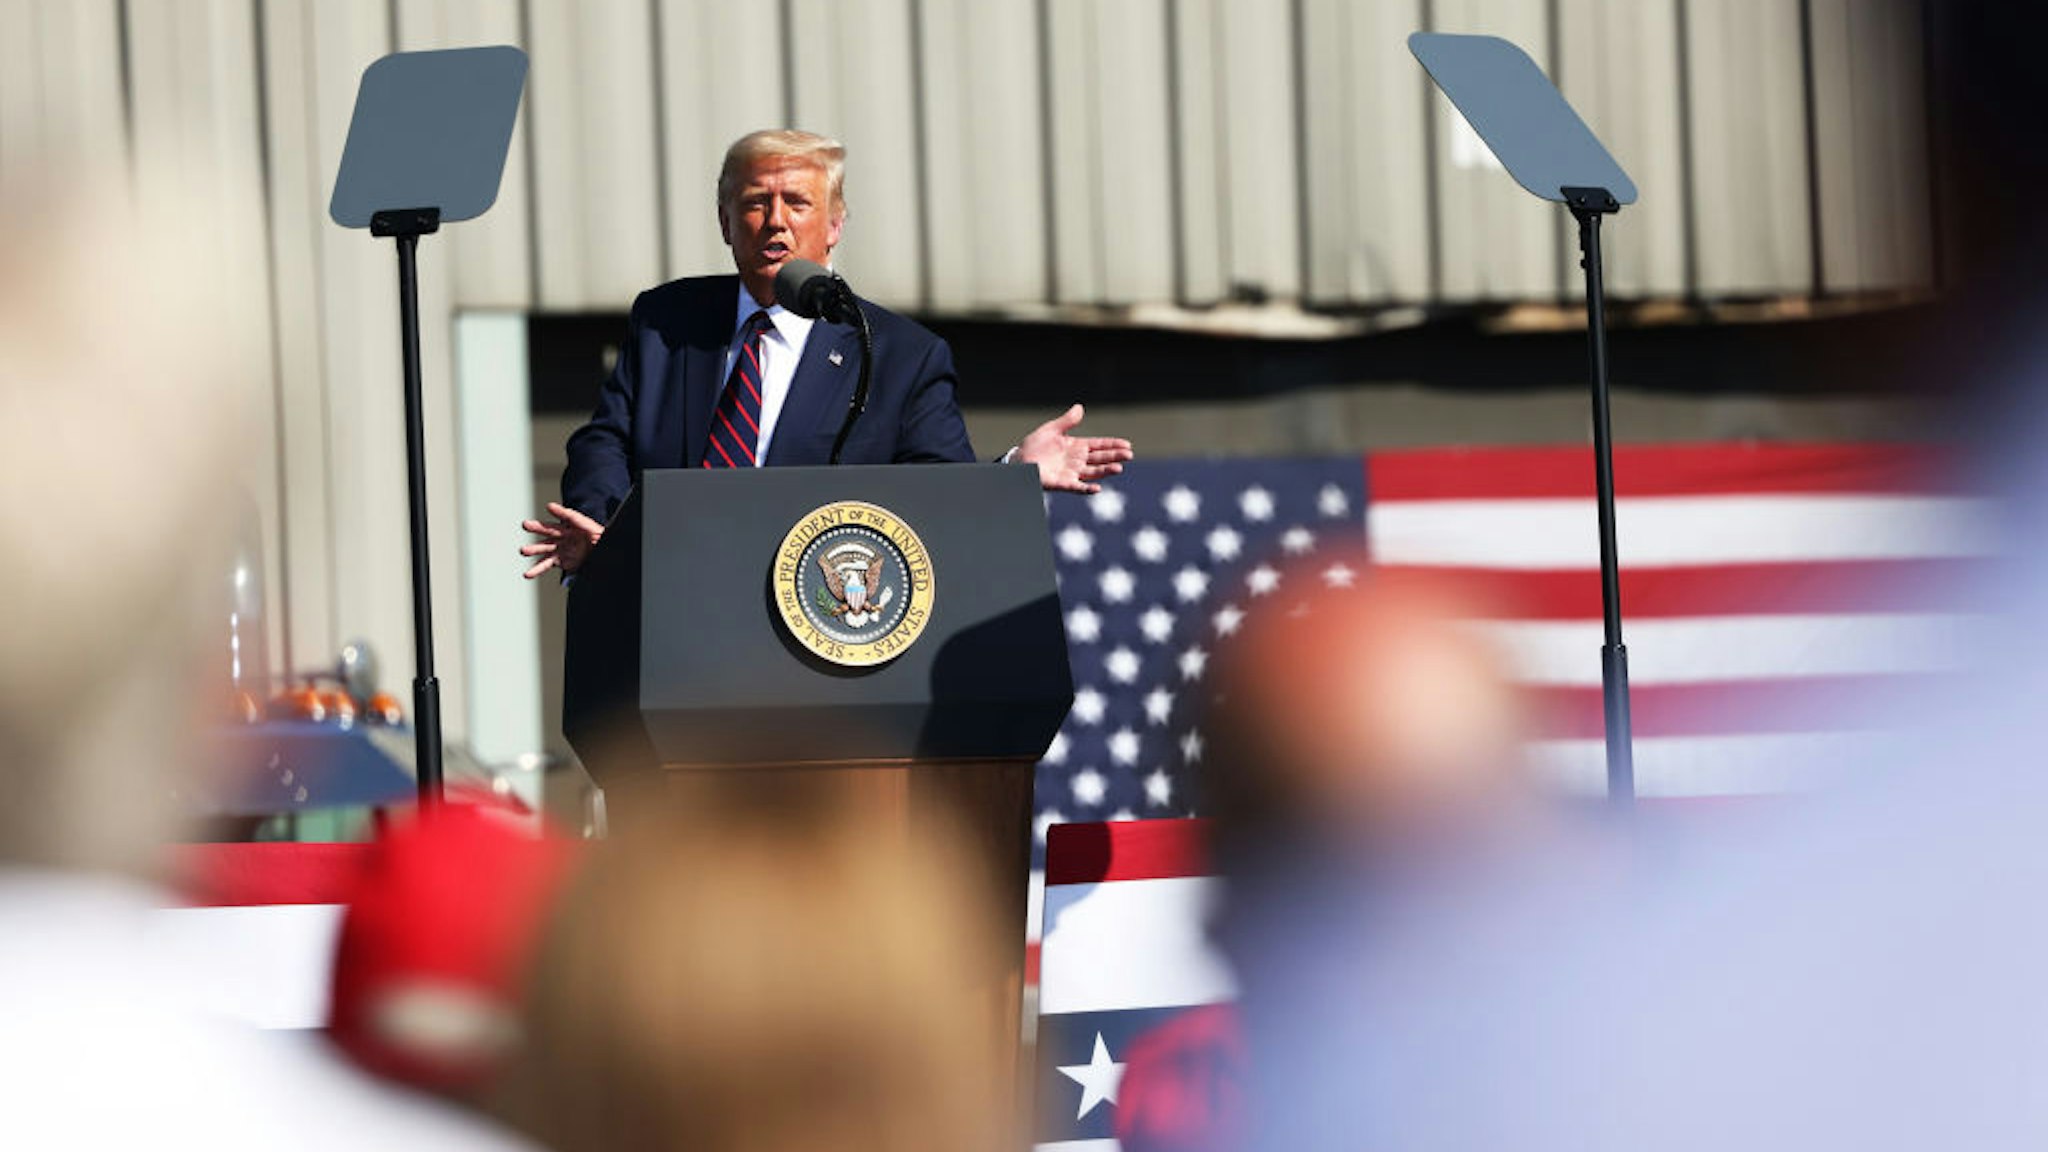 U.S. President Donald J. Trump speaks at his campaign rally on August 20, 2020 in Old Forge, Pennsylvania.